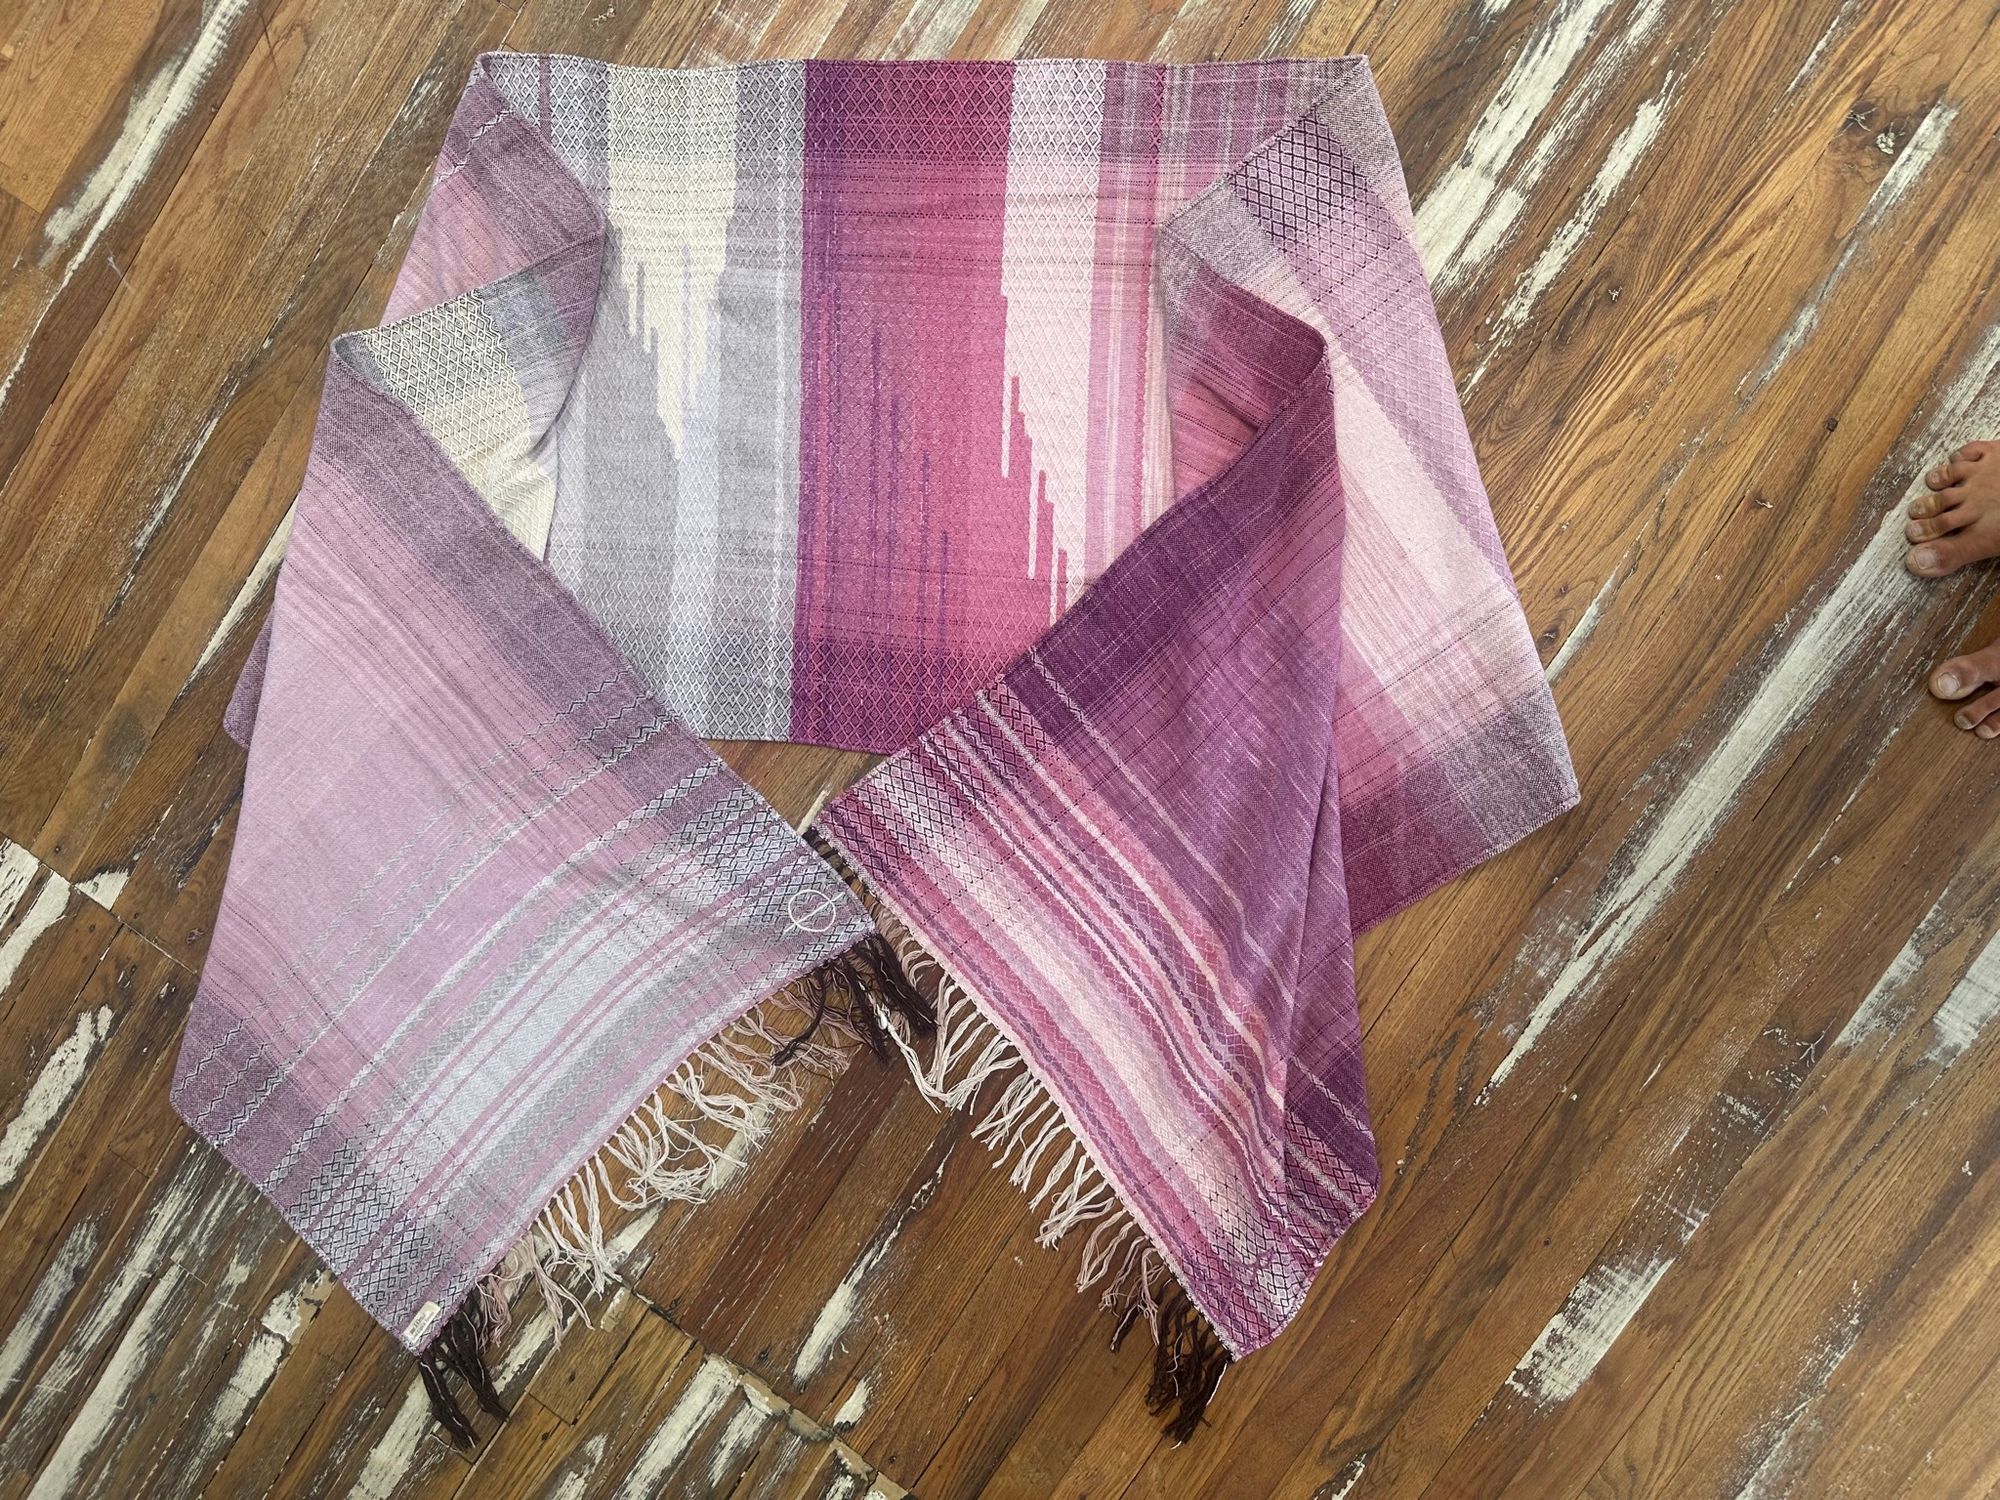 Handwoven fabric lays on a wood floor. The fabric is naturally dyed with cochineal in all shades of pink and fuchsia